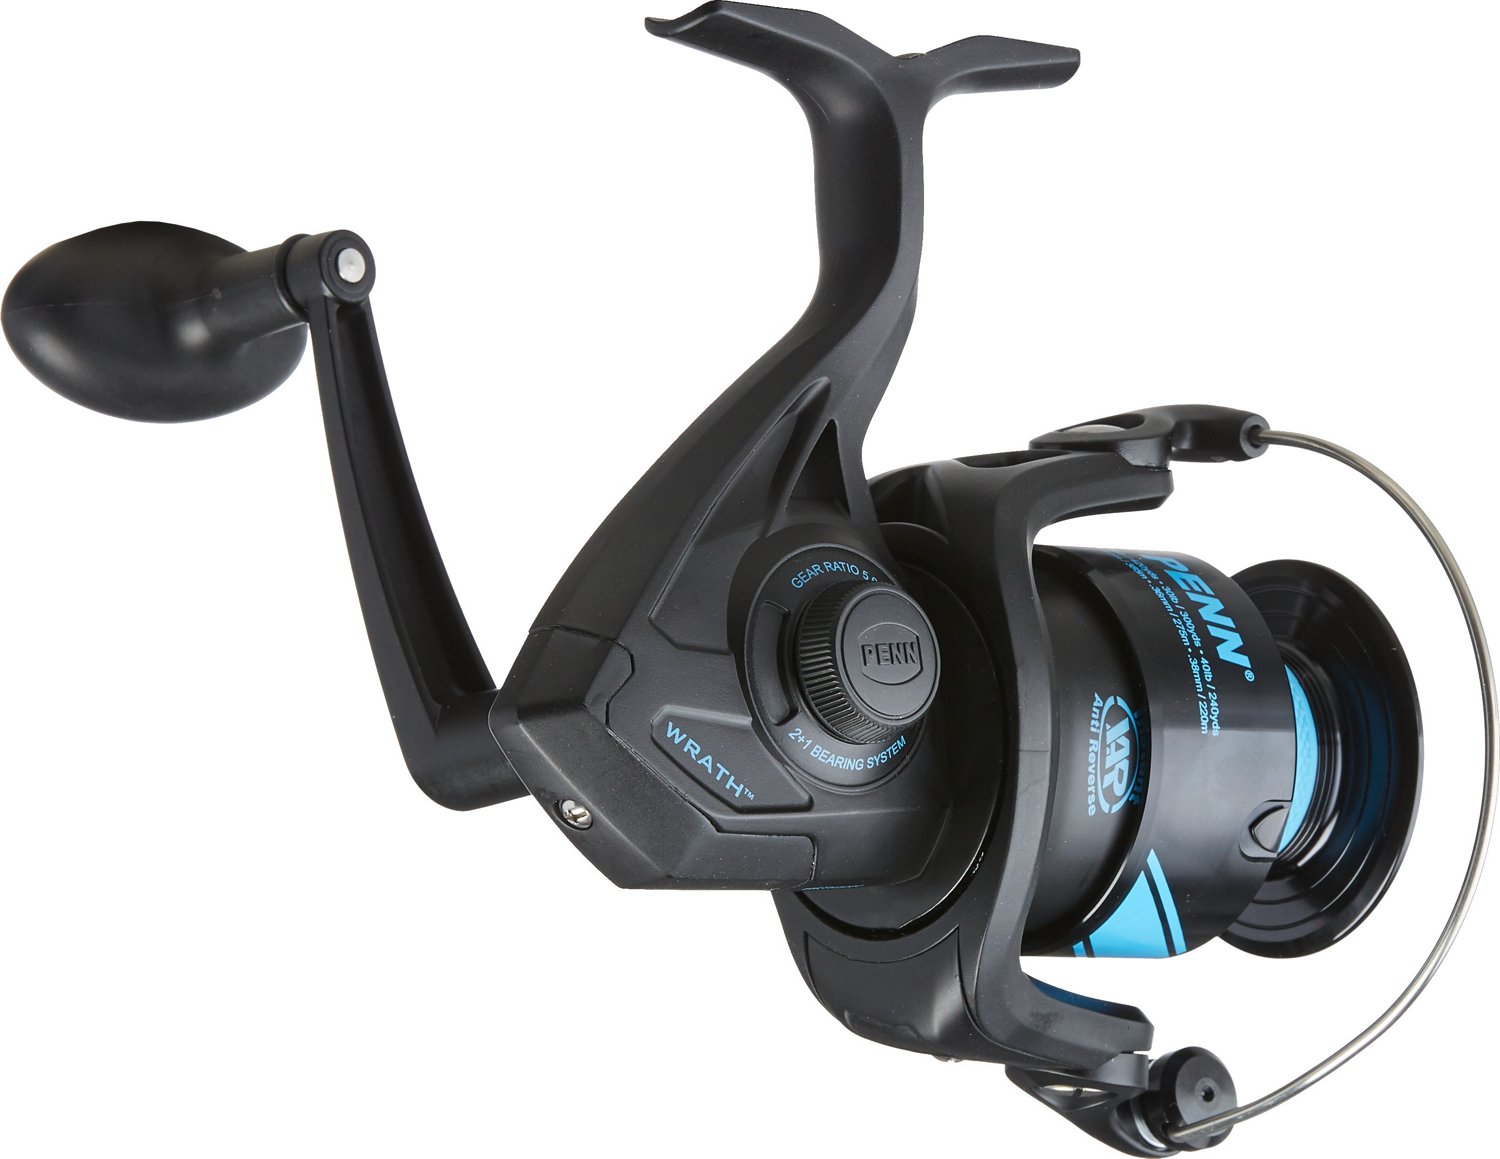 Penn Wrath BX Reel : Smooth & Durable ideal for all Anglers